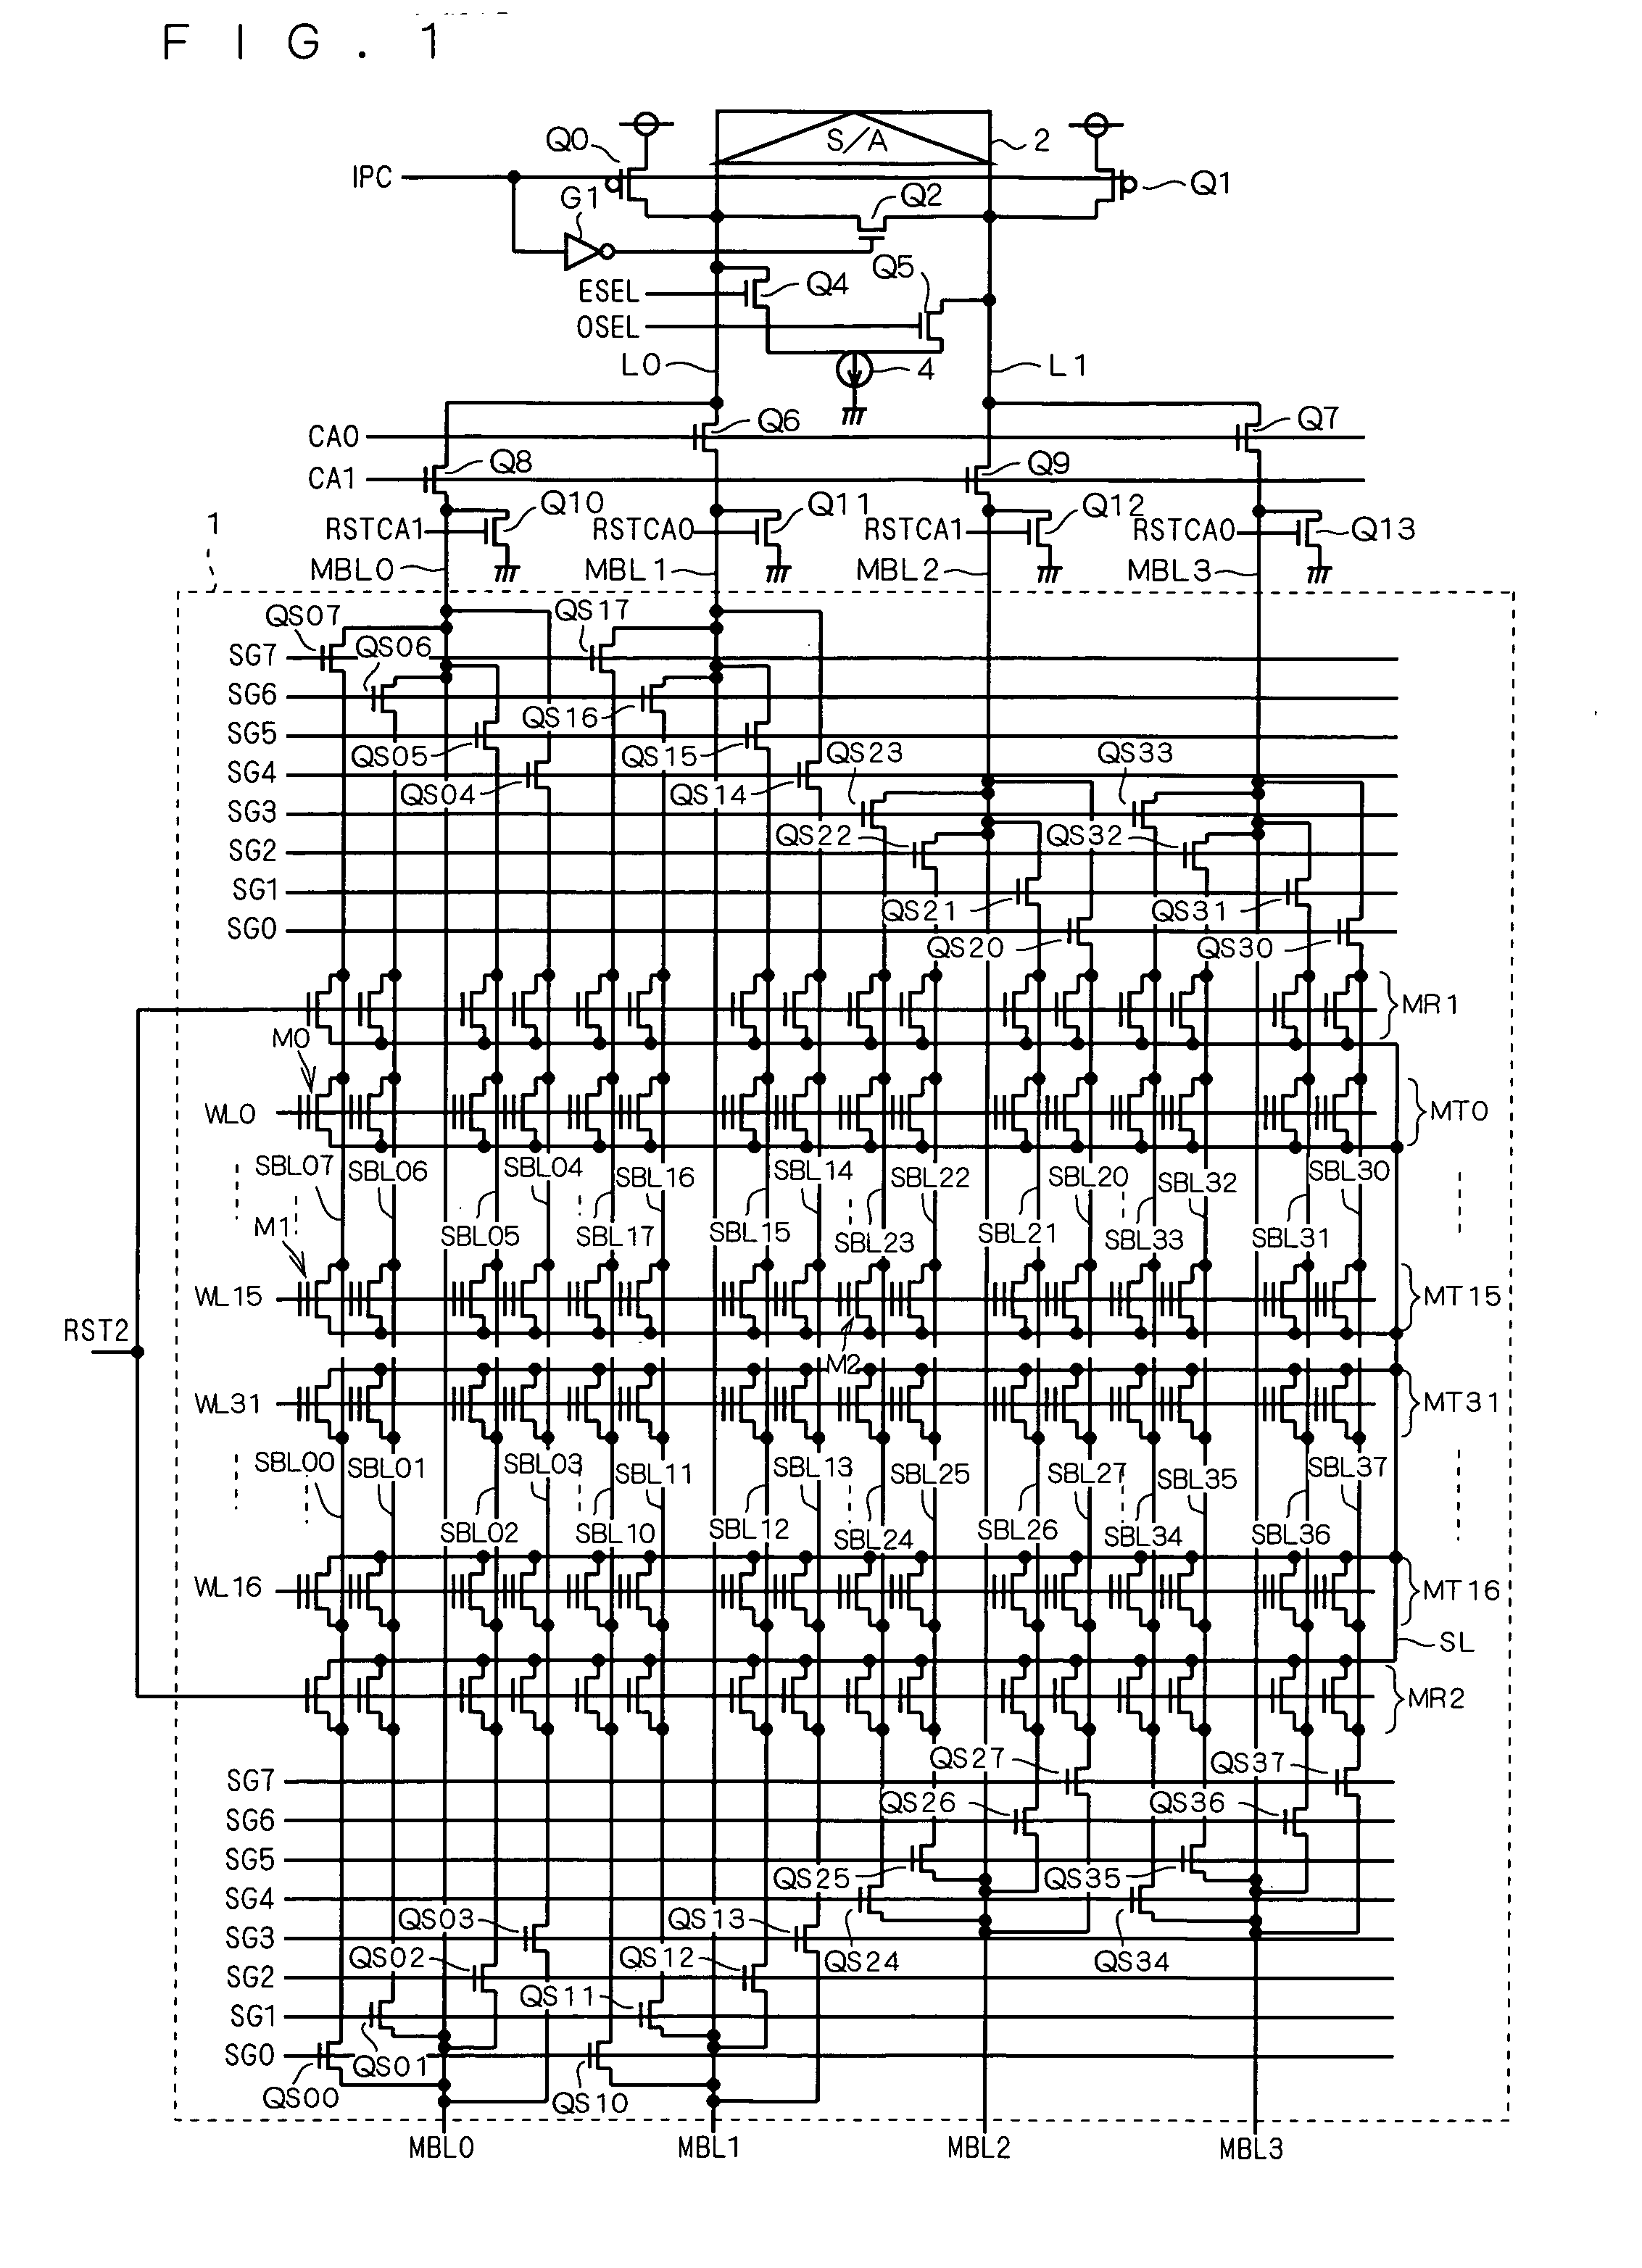 Nonvolatile semiconductor memory device that achieves speedup in read operation